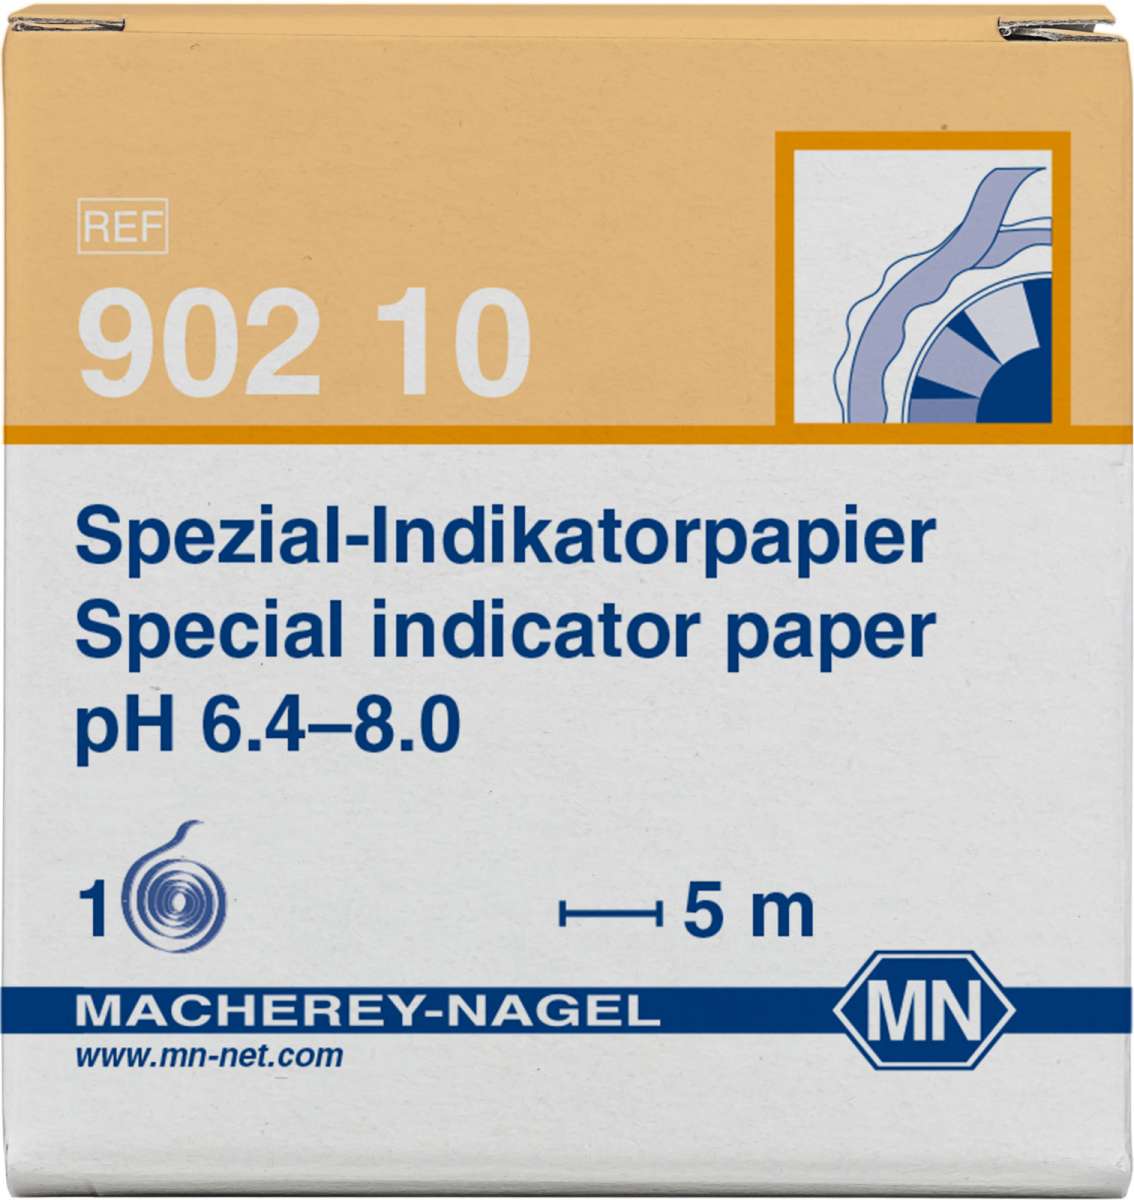 Special indicator paper pH 6.4 to 8.0 (Reel of 5m length and 7mm width)